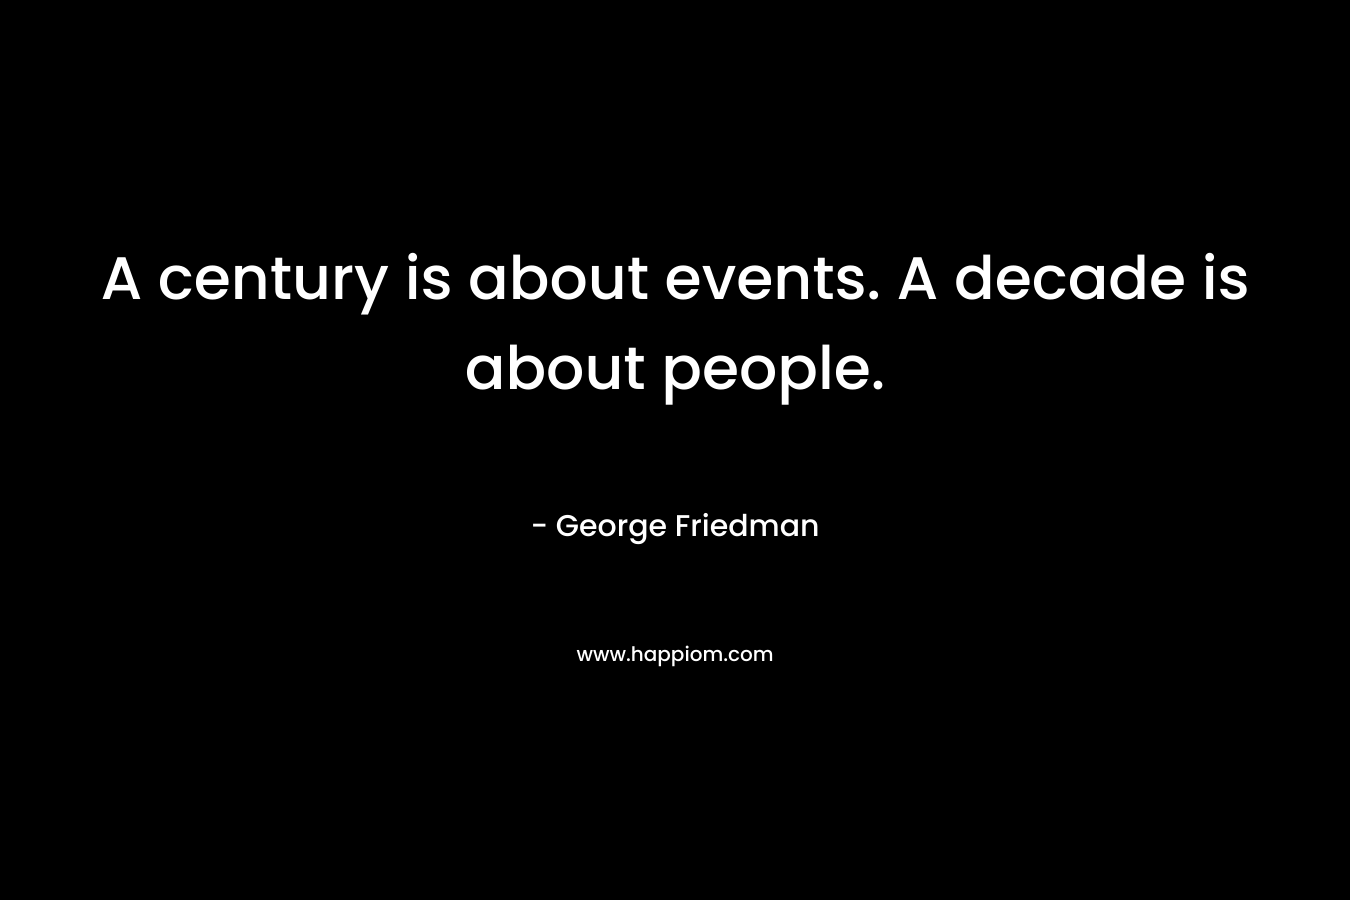 A century is about events. A decade is about people. – George Friedman